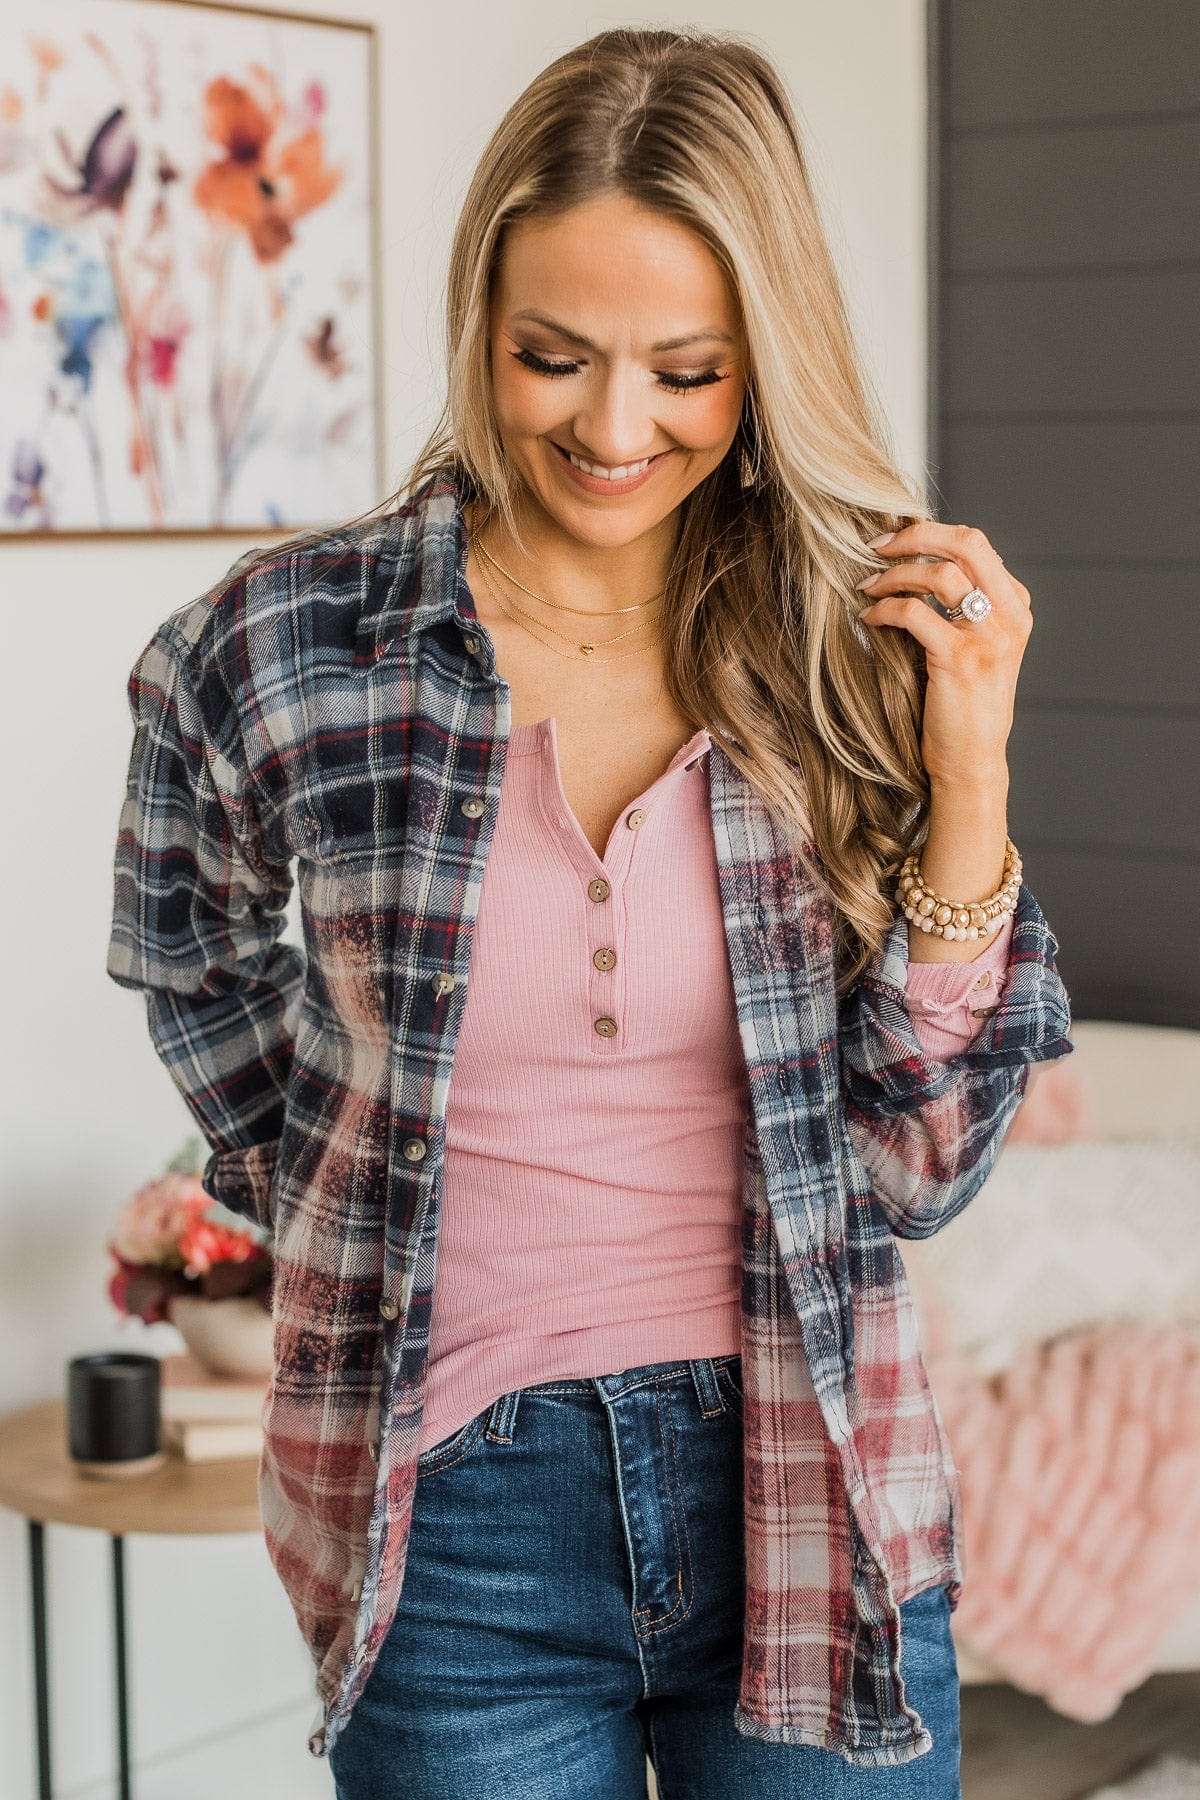 Follow You Anywhere Bleached Plaid Top- Navy & Pink